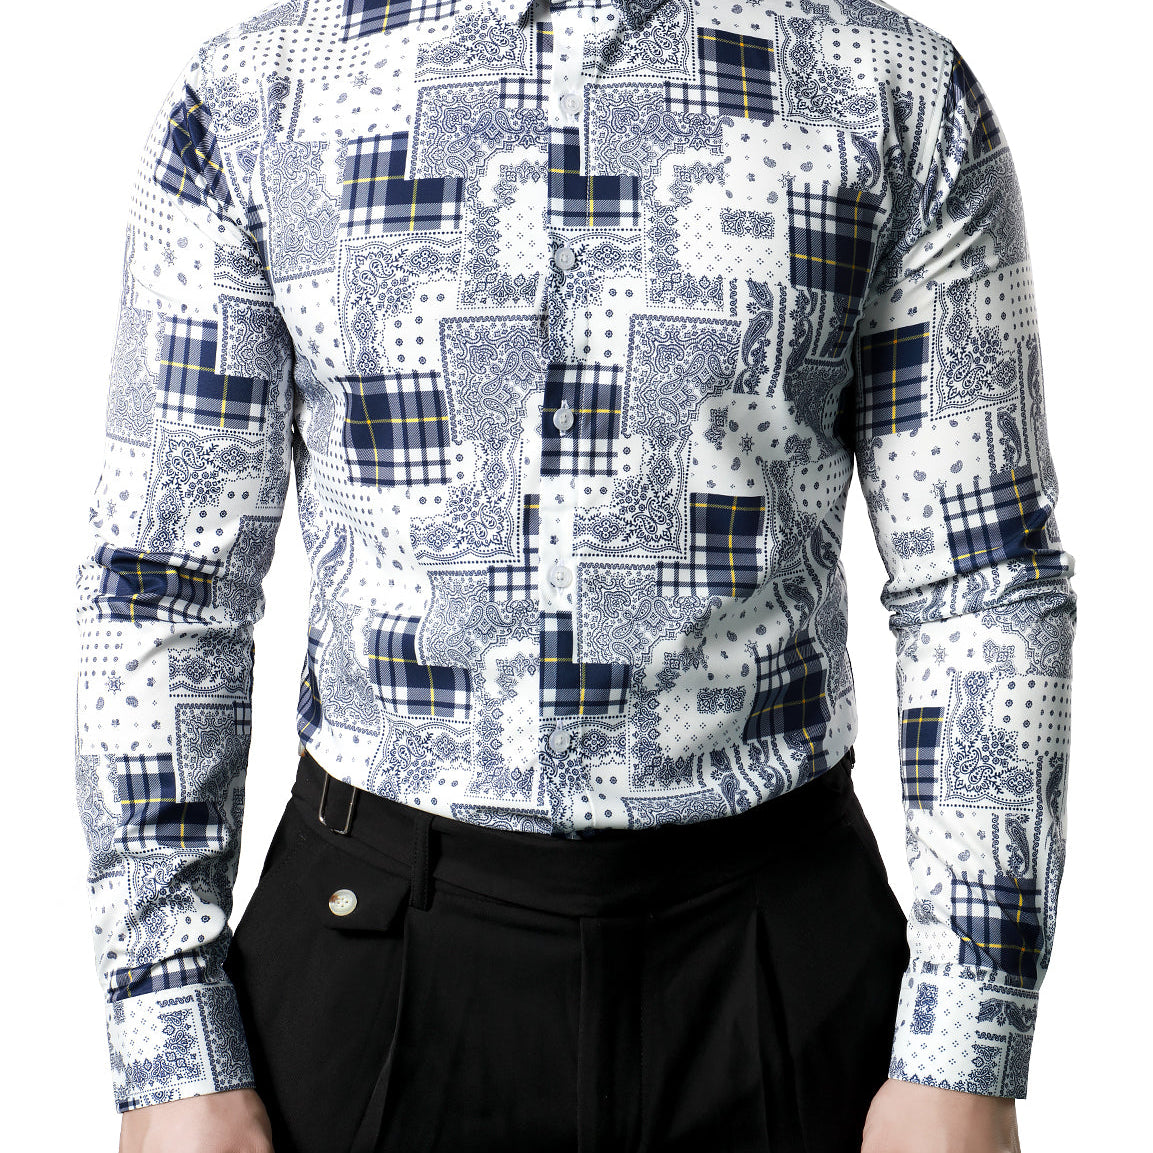 Men's Casual Paisley Check Print Checkered Patchwork White Long Sleeve Shirt